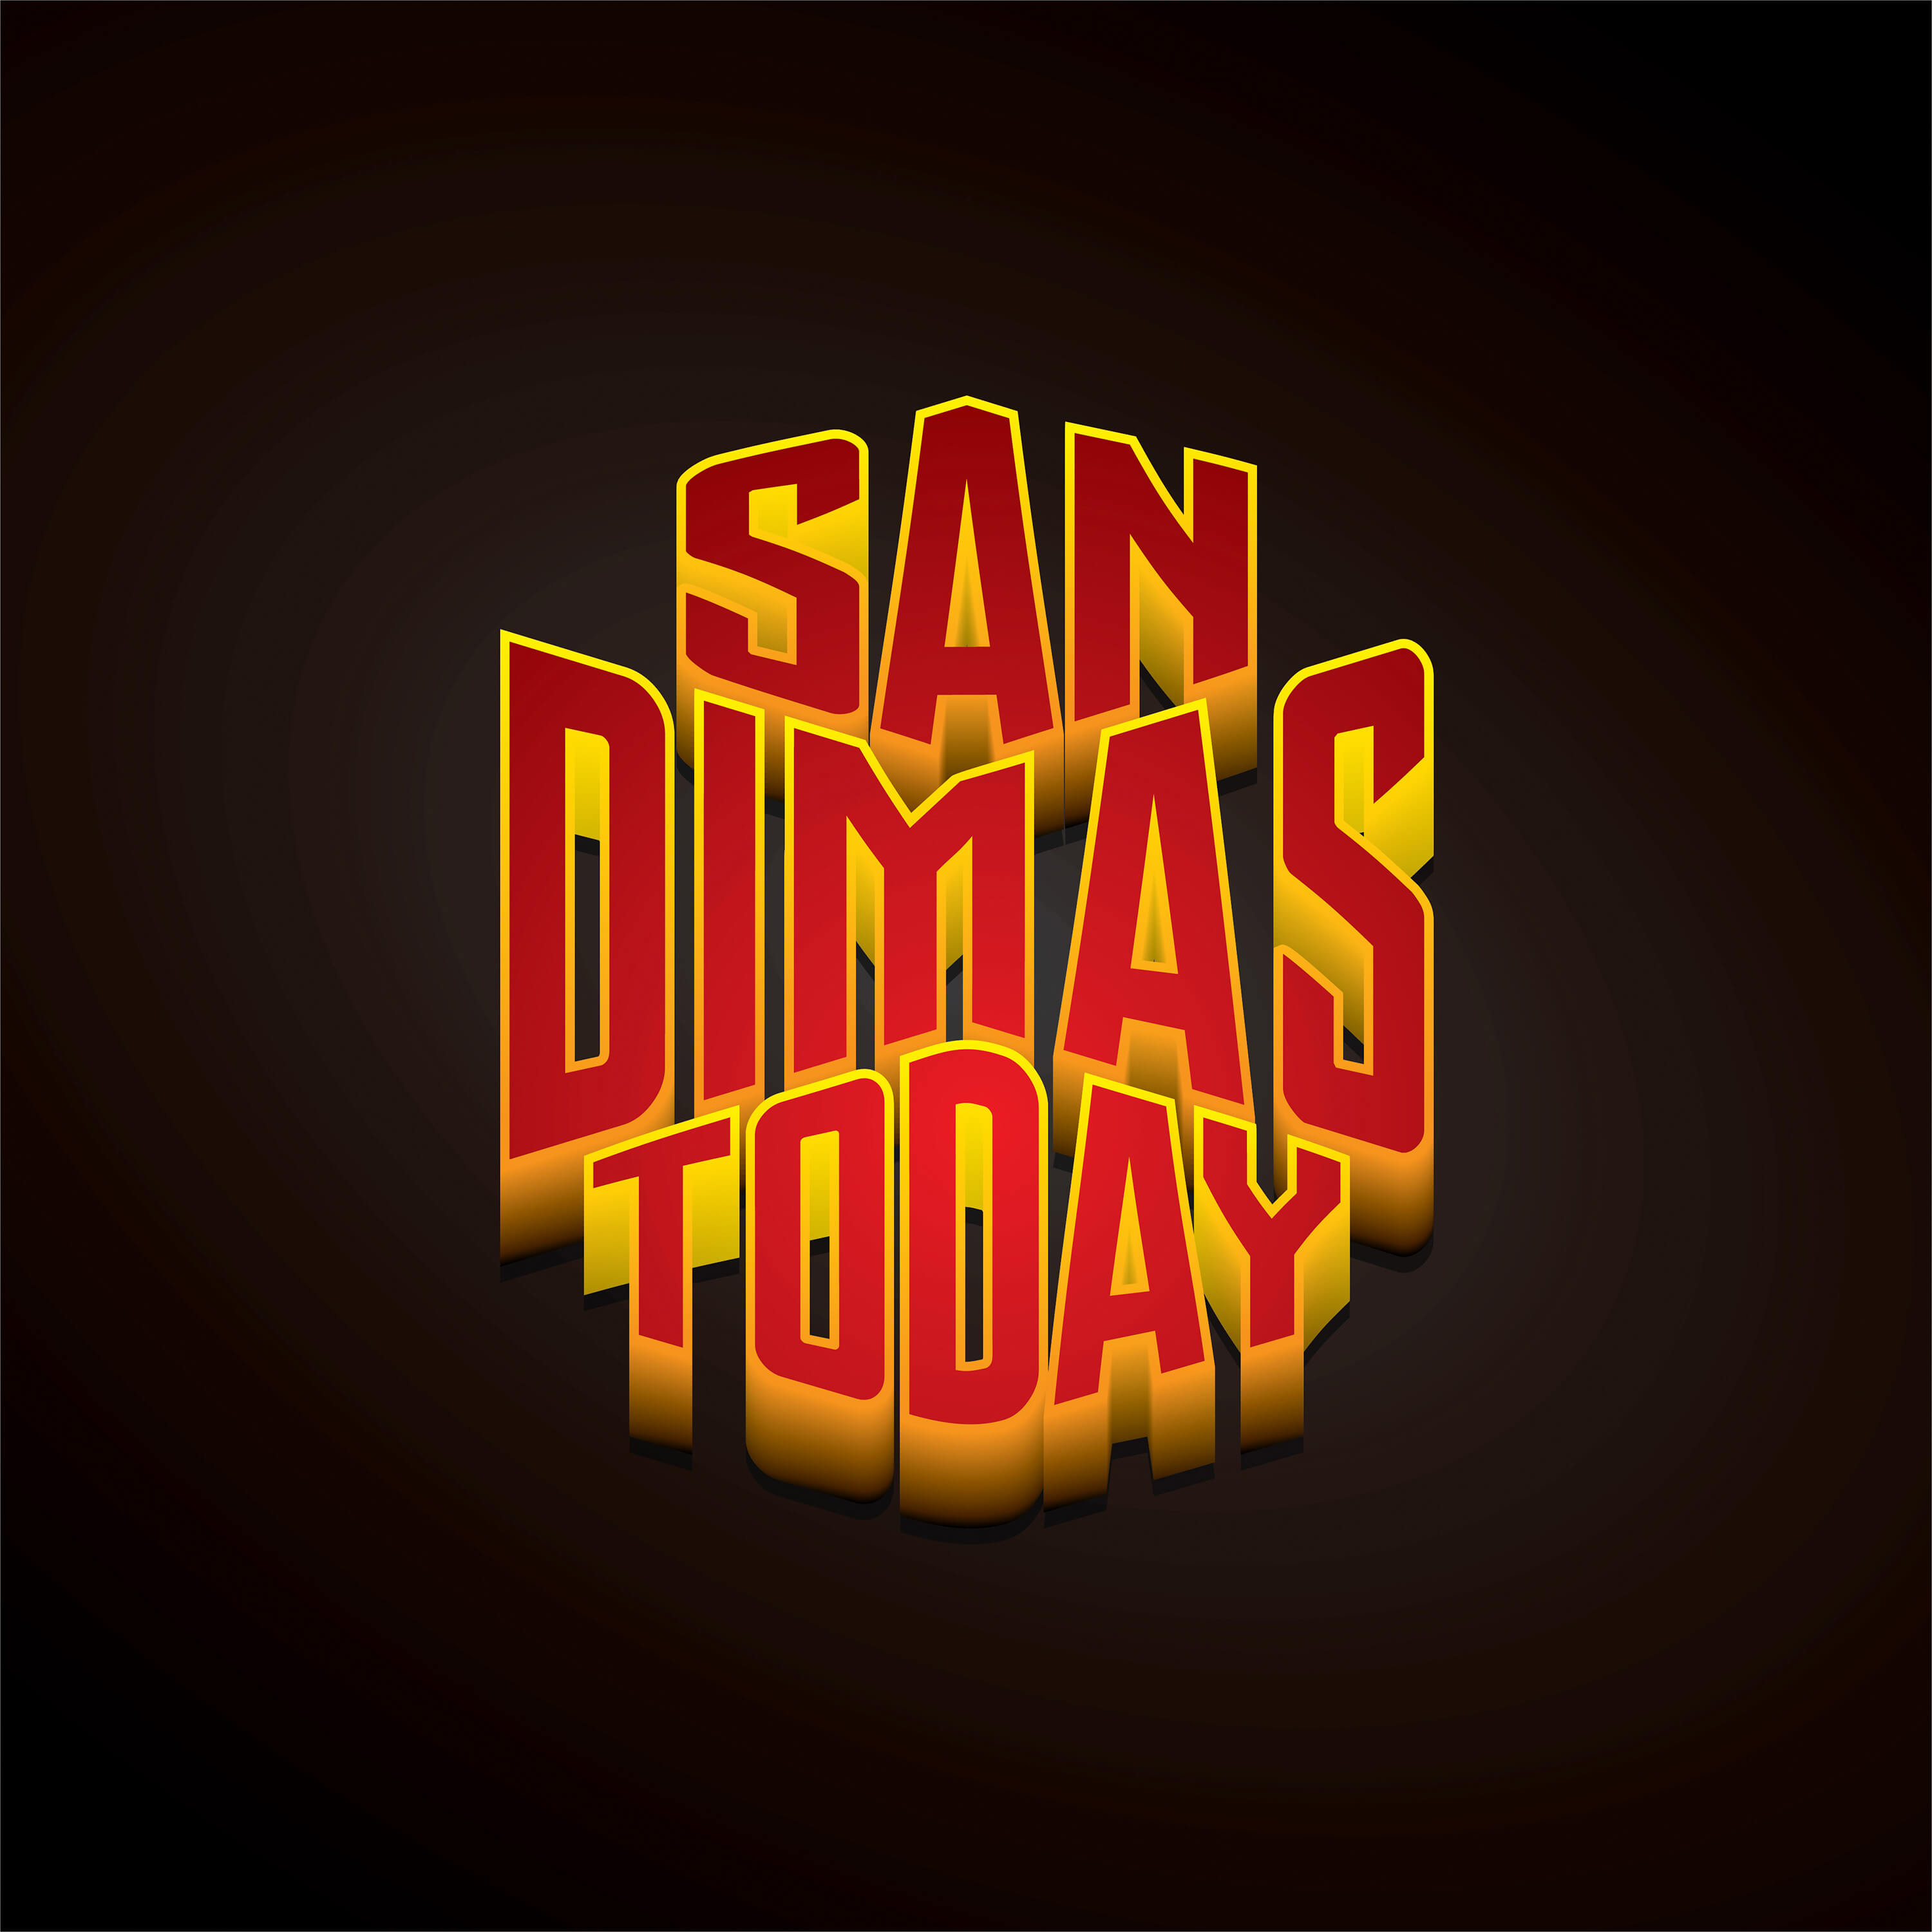 San Dimas Today: The Bill and Ted Podcast